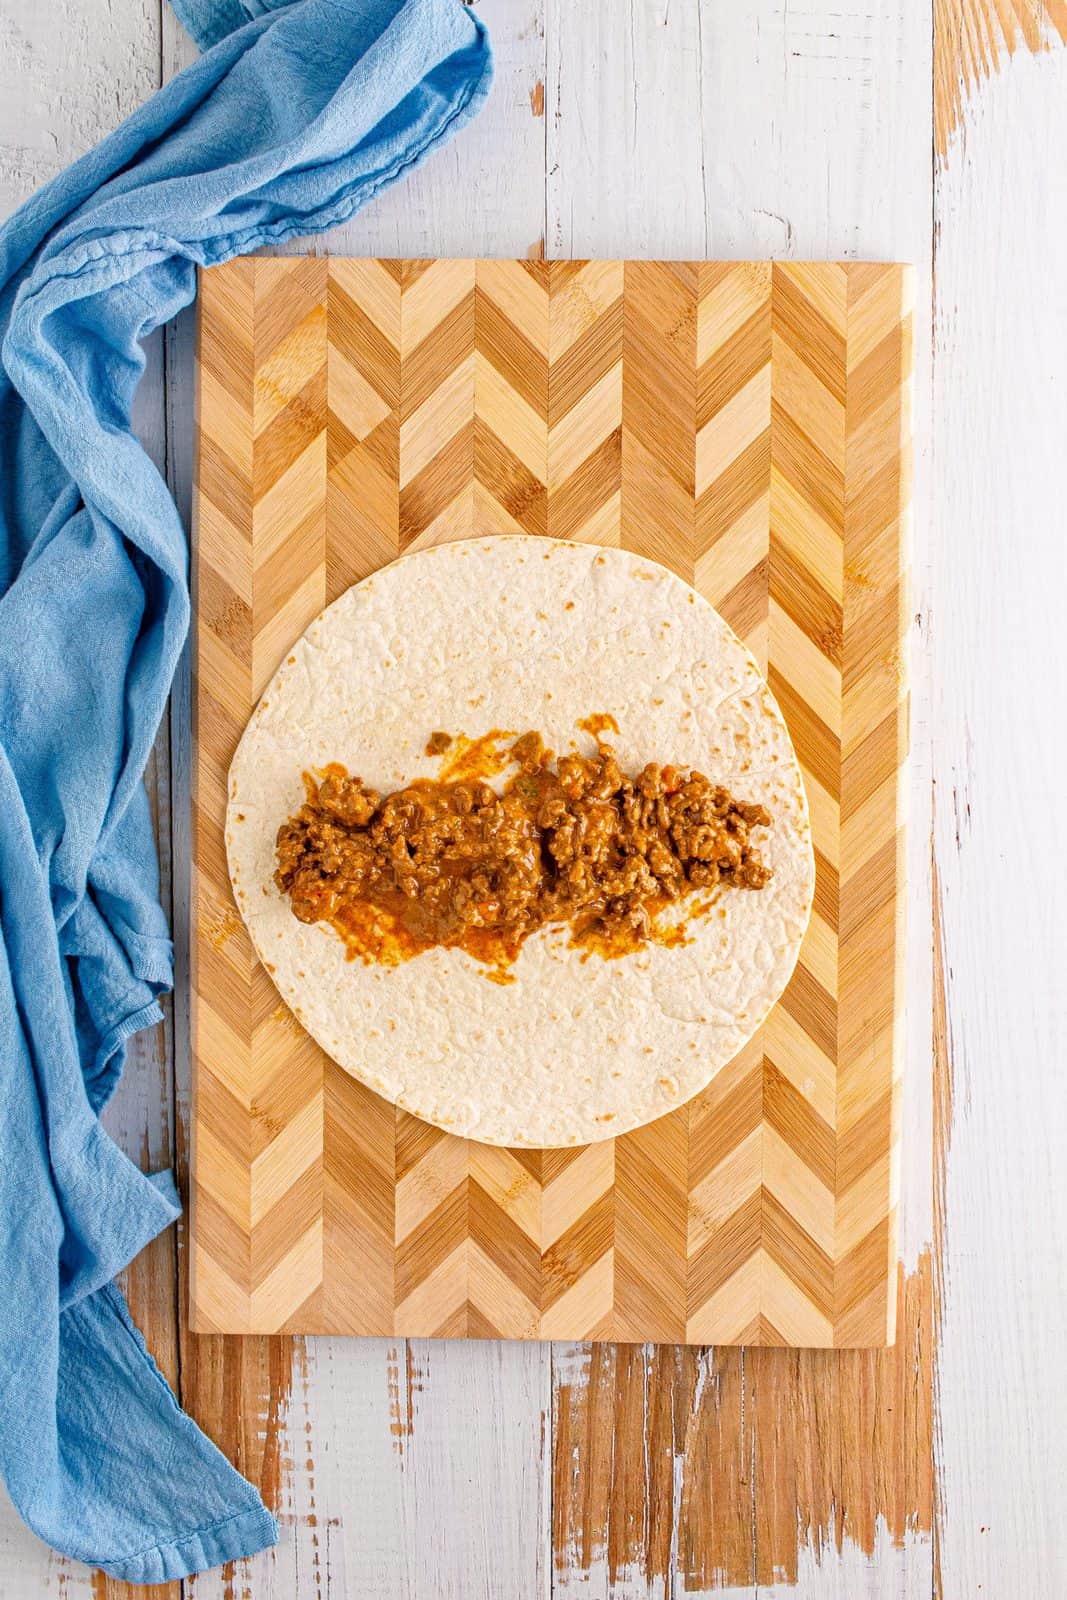 Ground beef mixture spread onto one tortilla on cutting board.